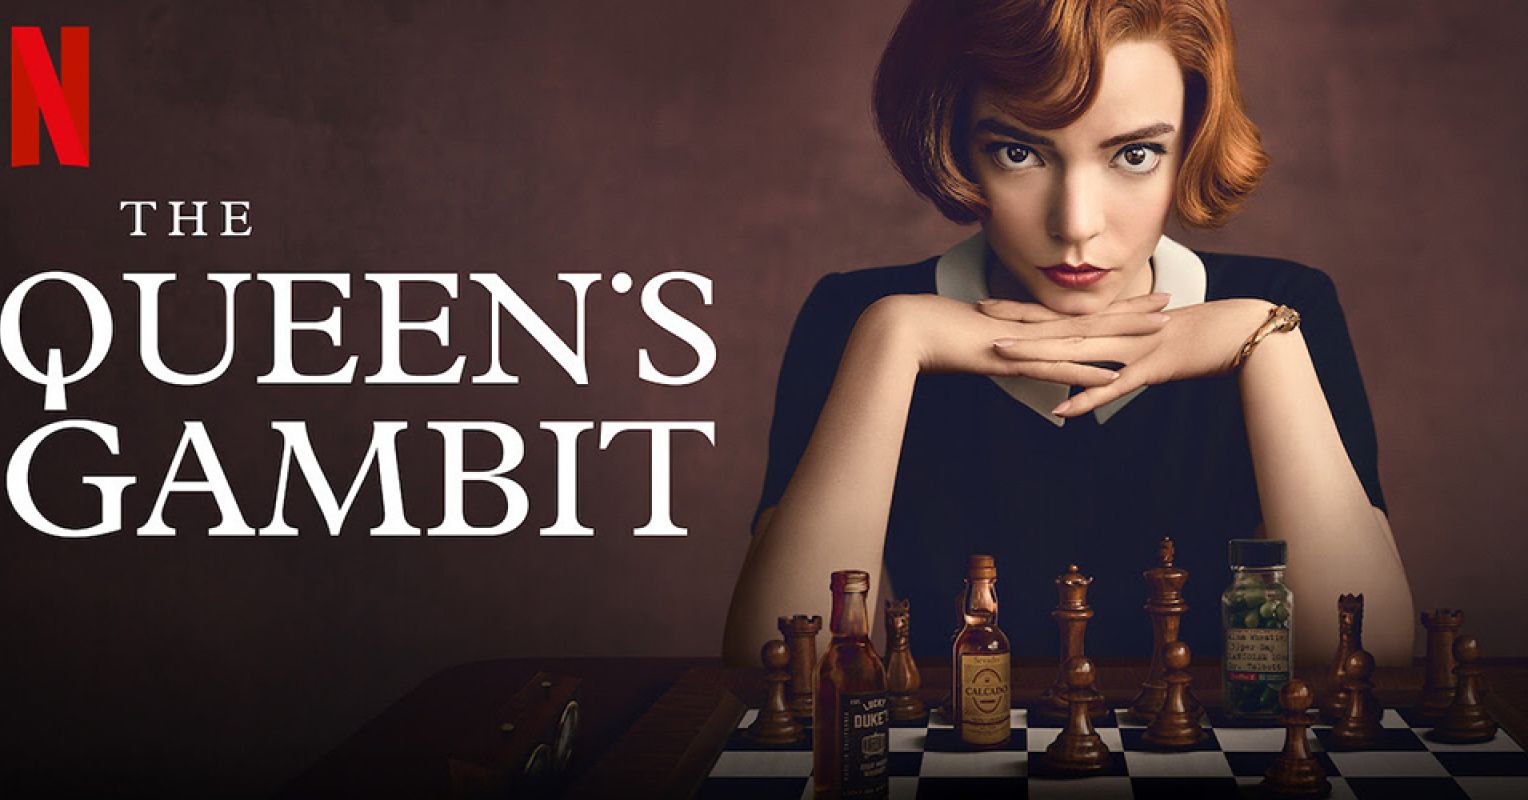 The Queen's Gambit and Sexuality: Beth Harmon Does Whatever She